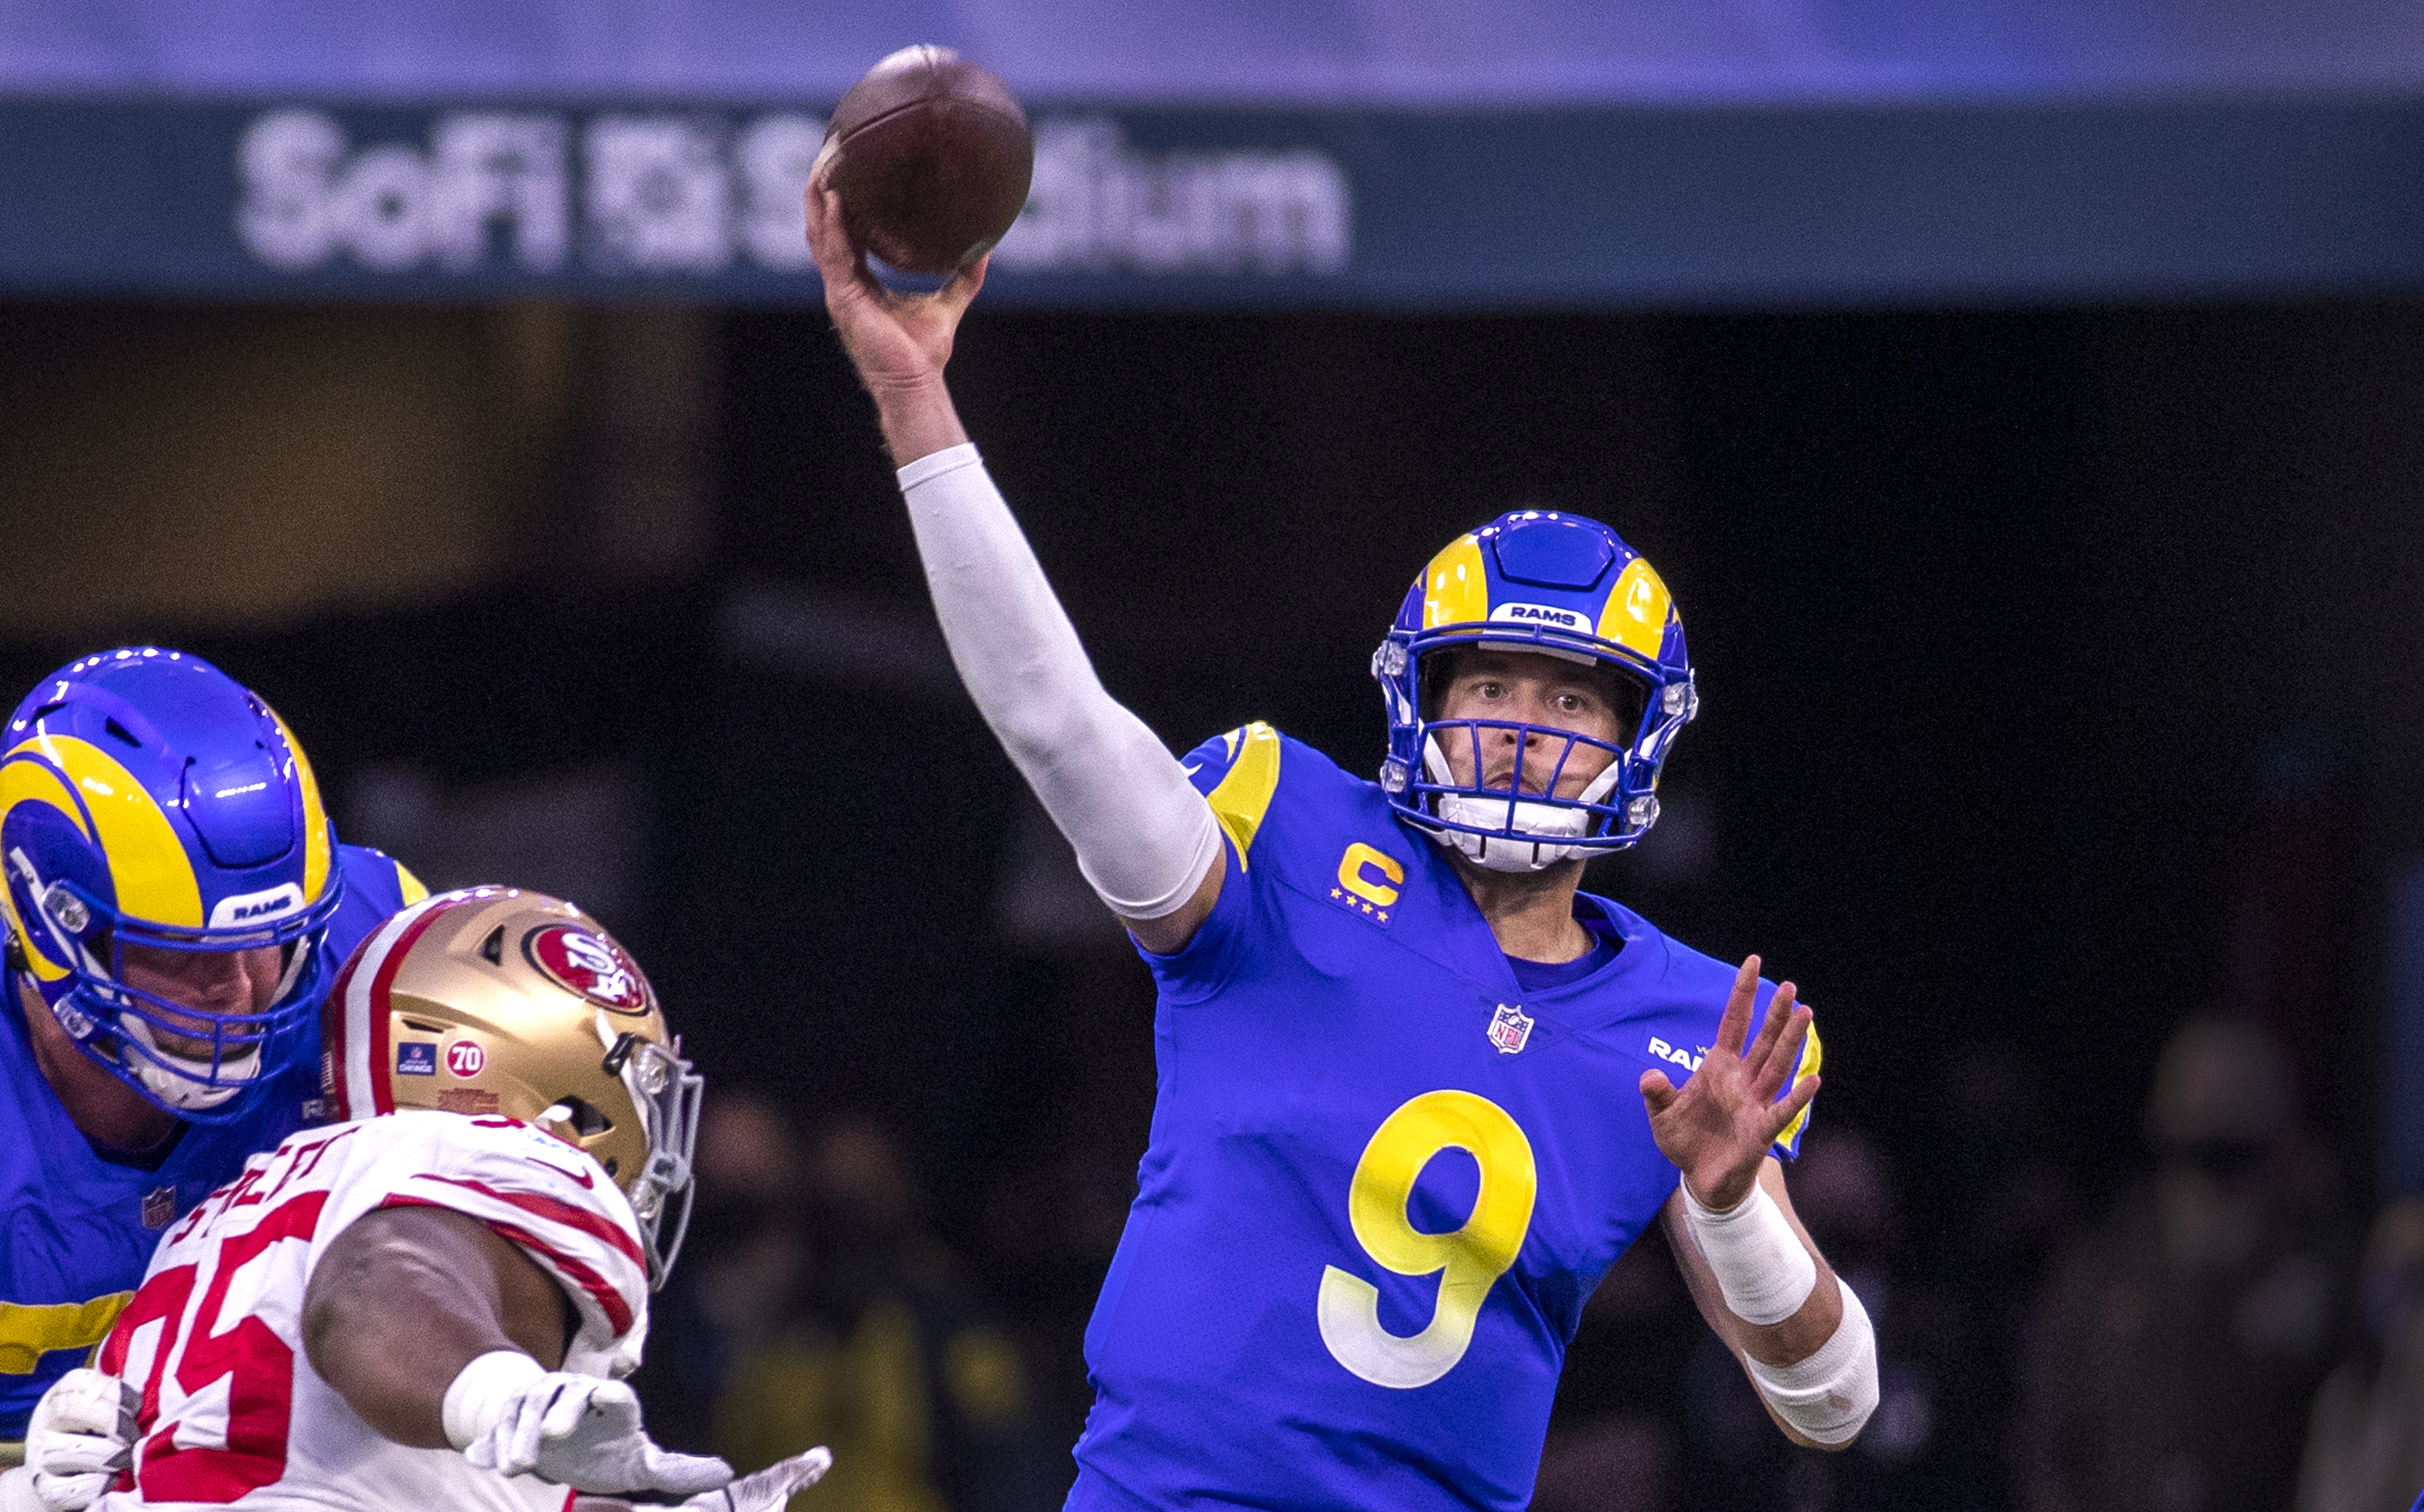 Rams quarterback Matthew Stafford passes the ball during their 20-17 victory over the San Francisco 49ers in the NFC Championships at SoFi Stadium on Sunday, Jan. 30, 2022 in Los Angeles, CA.